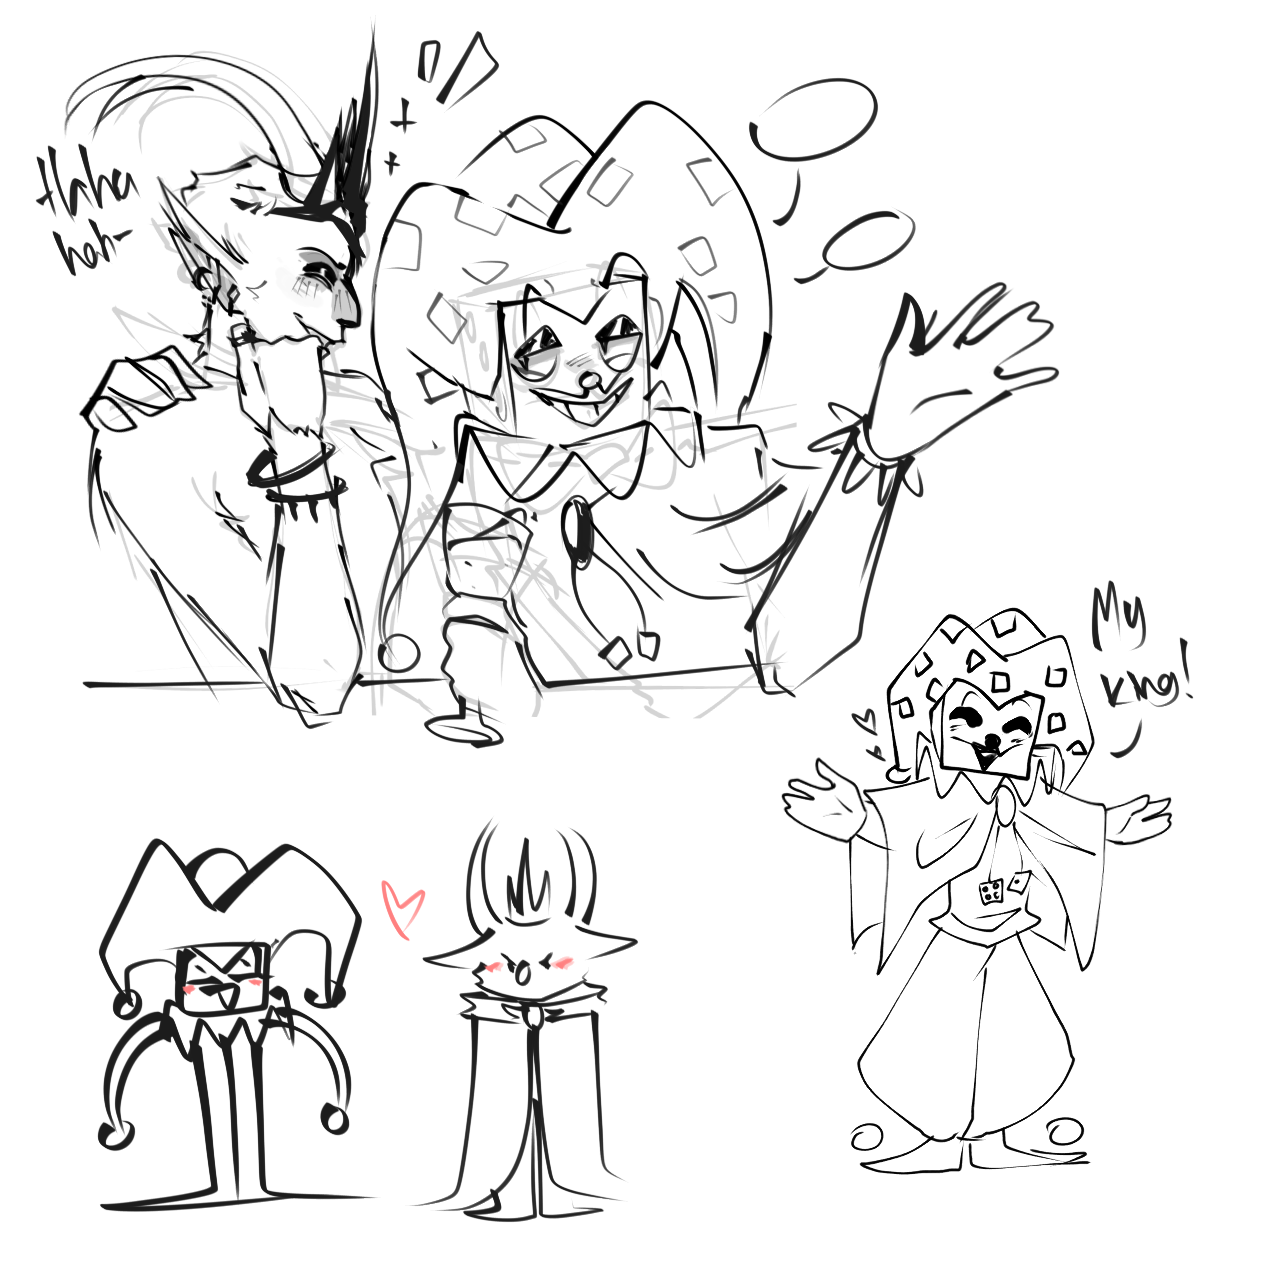 crying_anabell on X: man i love jester ocs